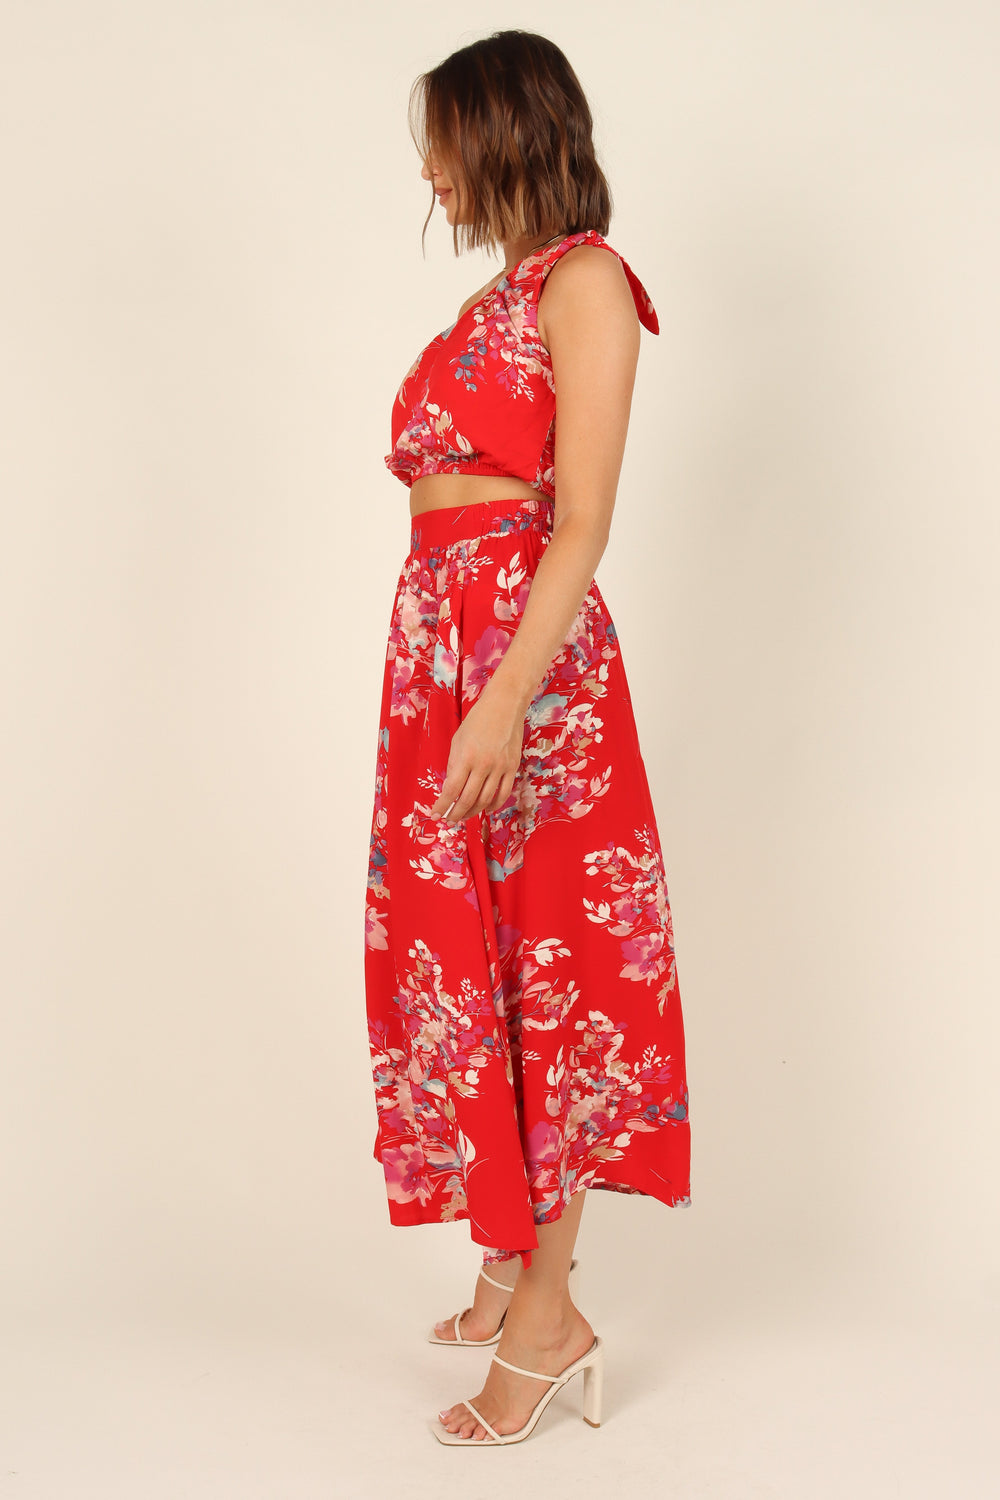 Petal and Pup USA TOPS Laura Top - Red Floral